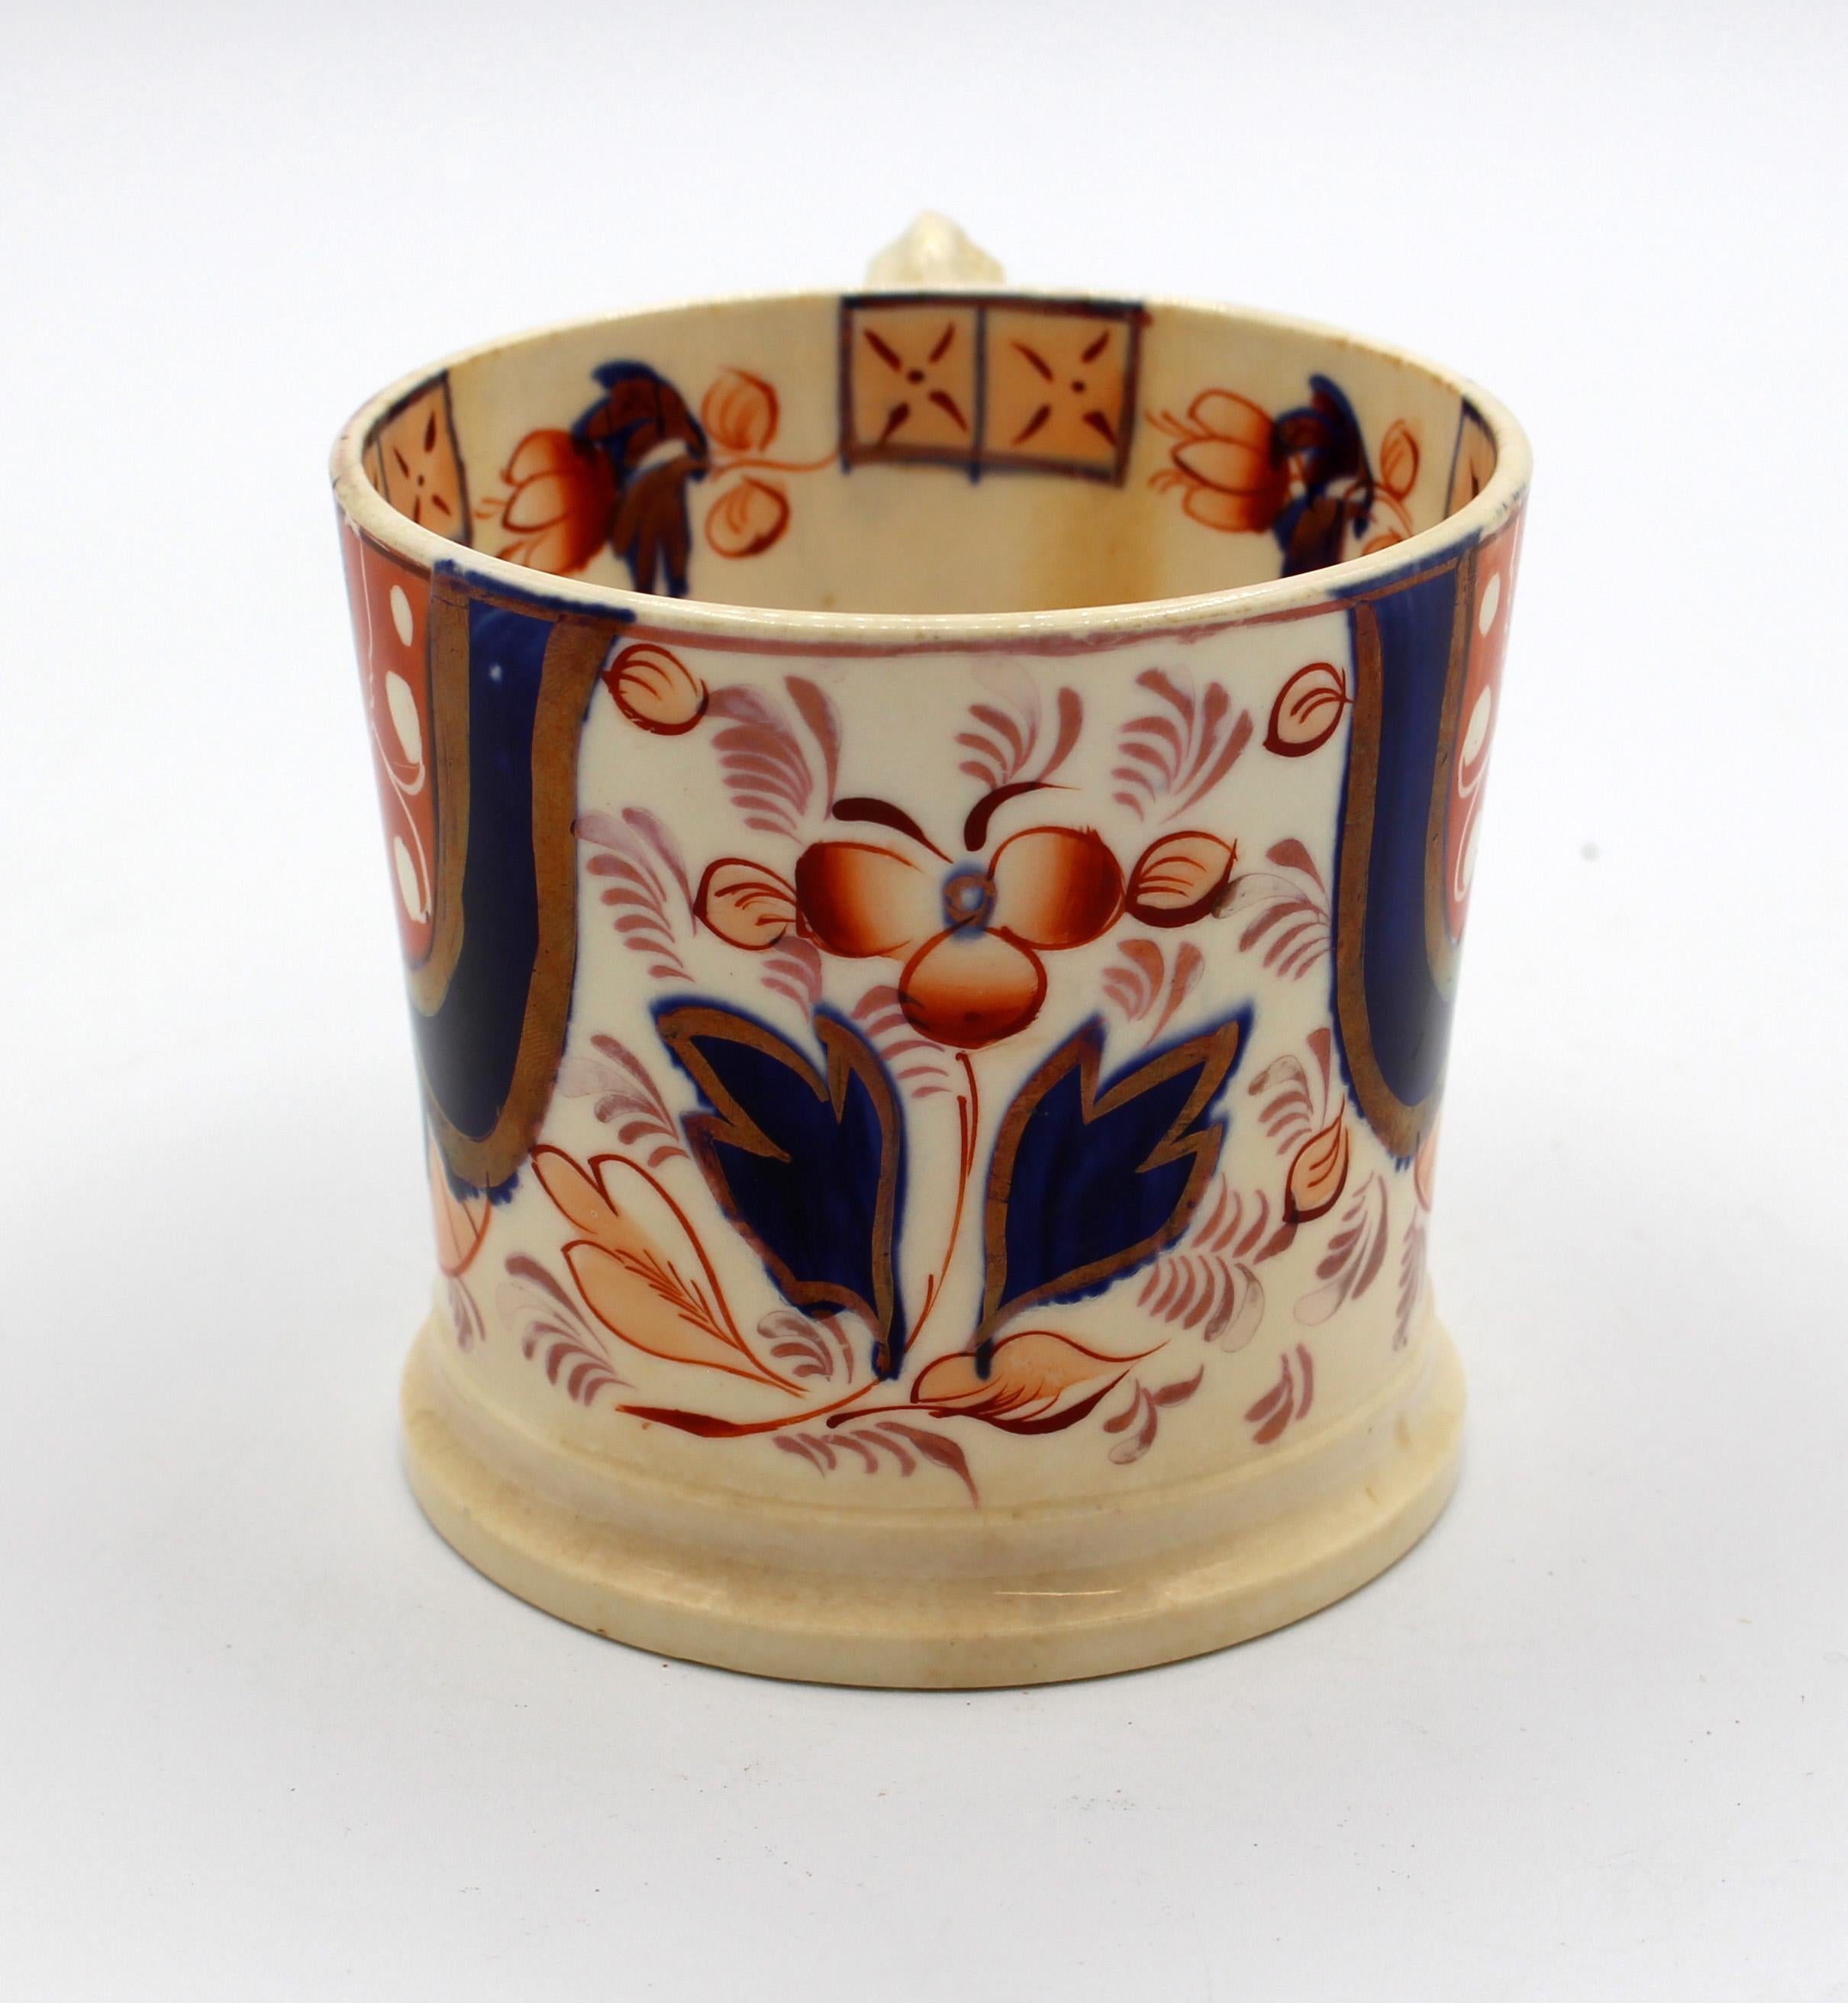 circa 1840s Gaudy Welsh Asian or Hexagen porcelain tankard. Bold orange, underglaze blue & luster highlights. Hairlines in base & some staining. Measures: 4.5